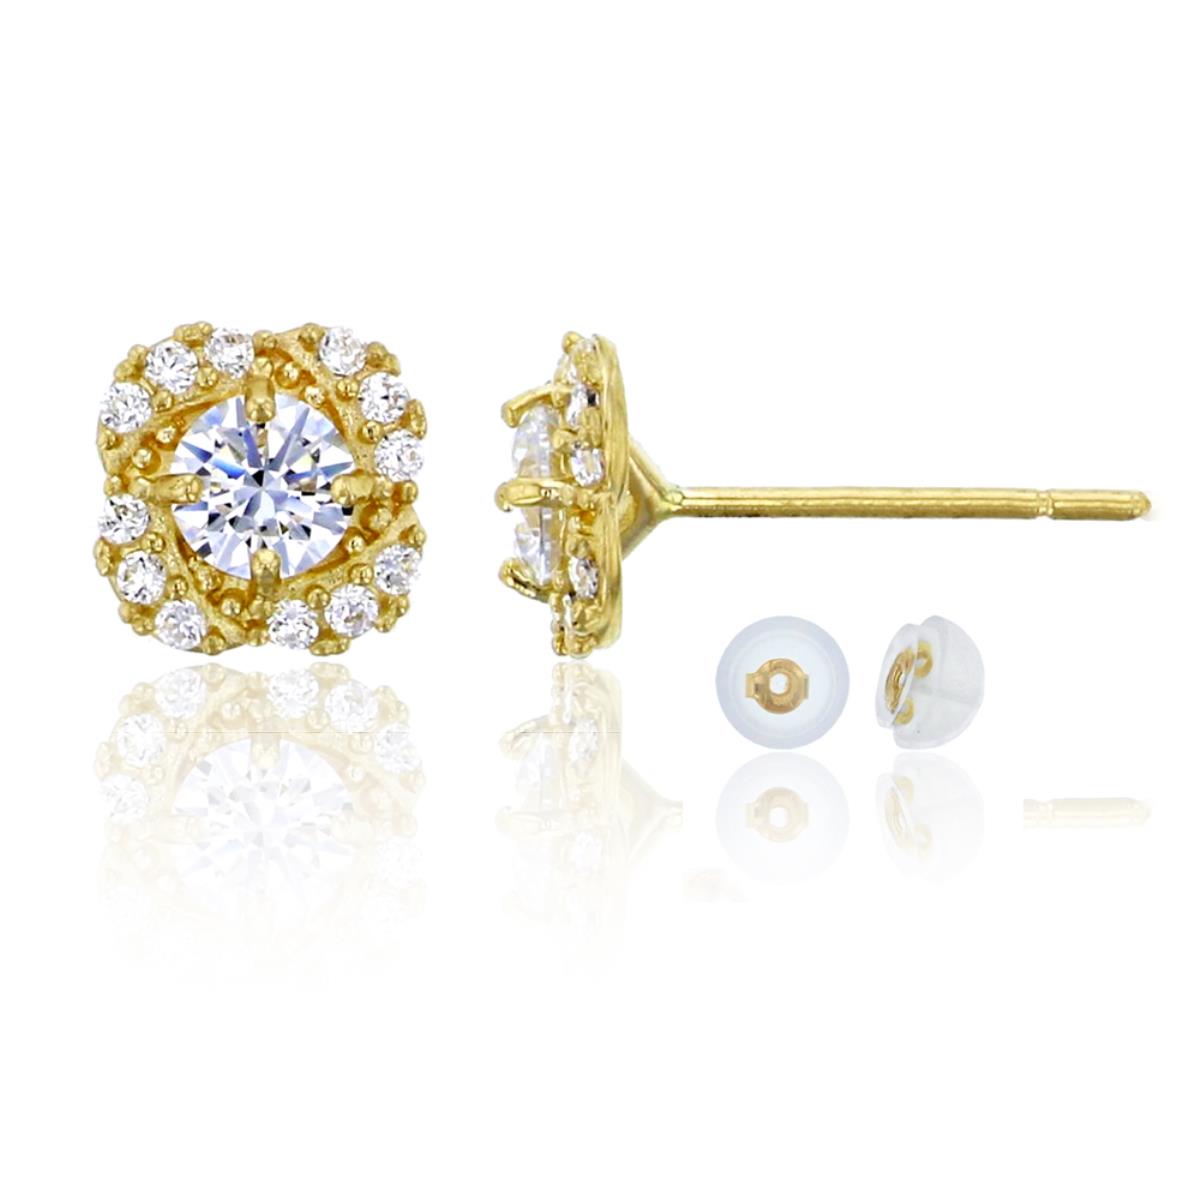 10K Yellow Gold Micropave 3.5mm Round Cut Clover CZ Stud & 10K Silicone Back